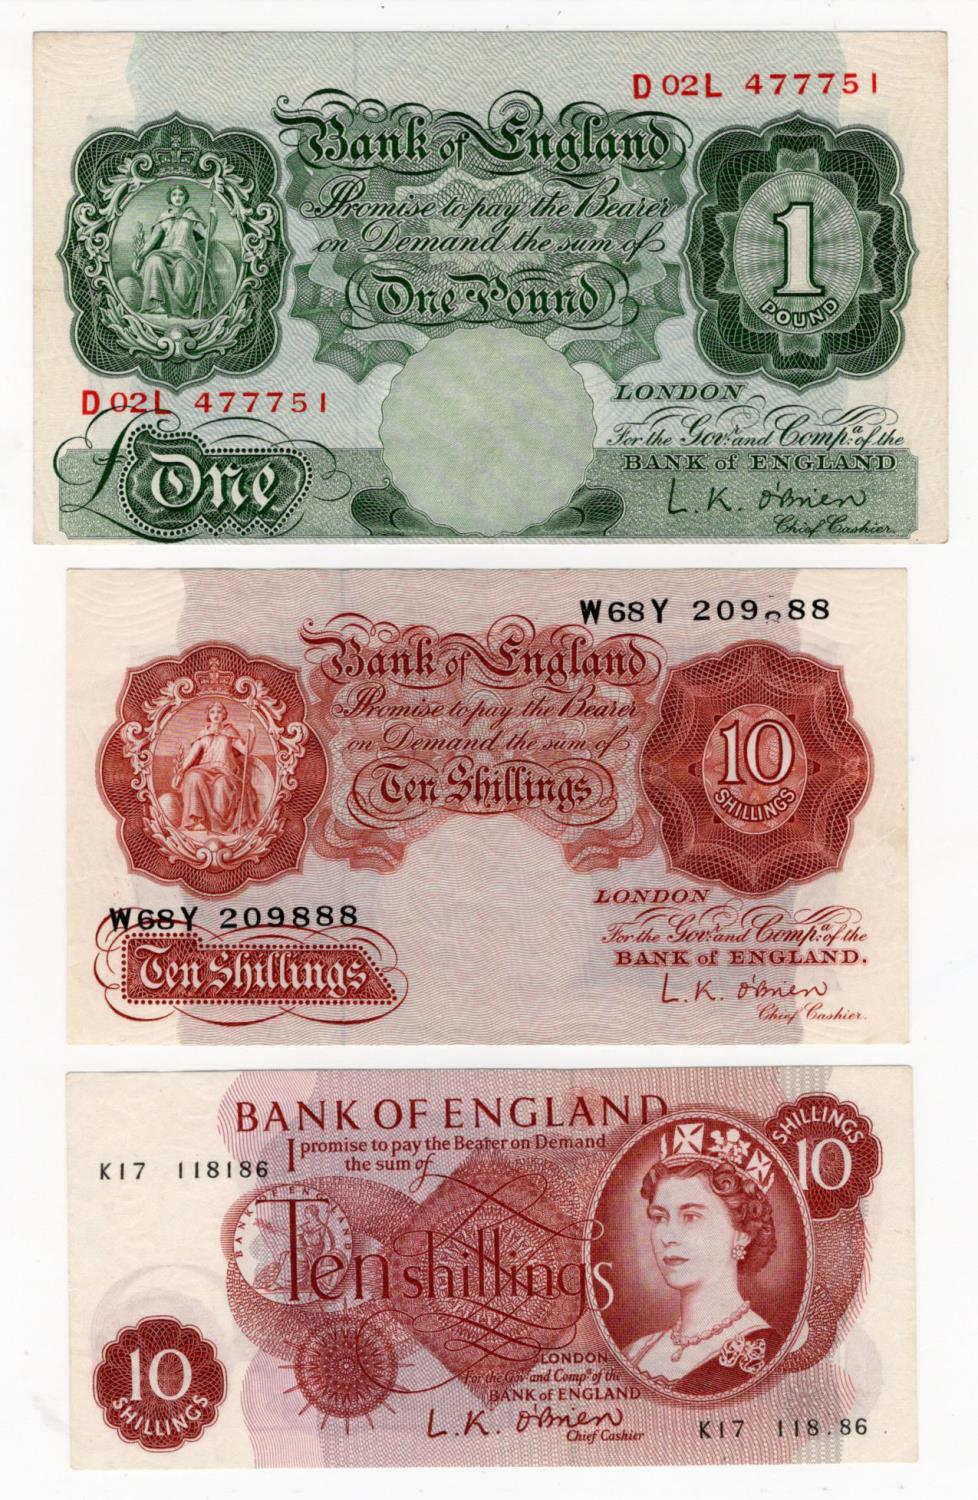 ERROR O'Brien (3), a group of error notes, 1 Pound issued 1955, vertical miscut design at bottom,